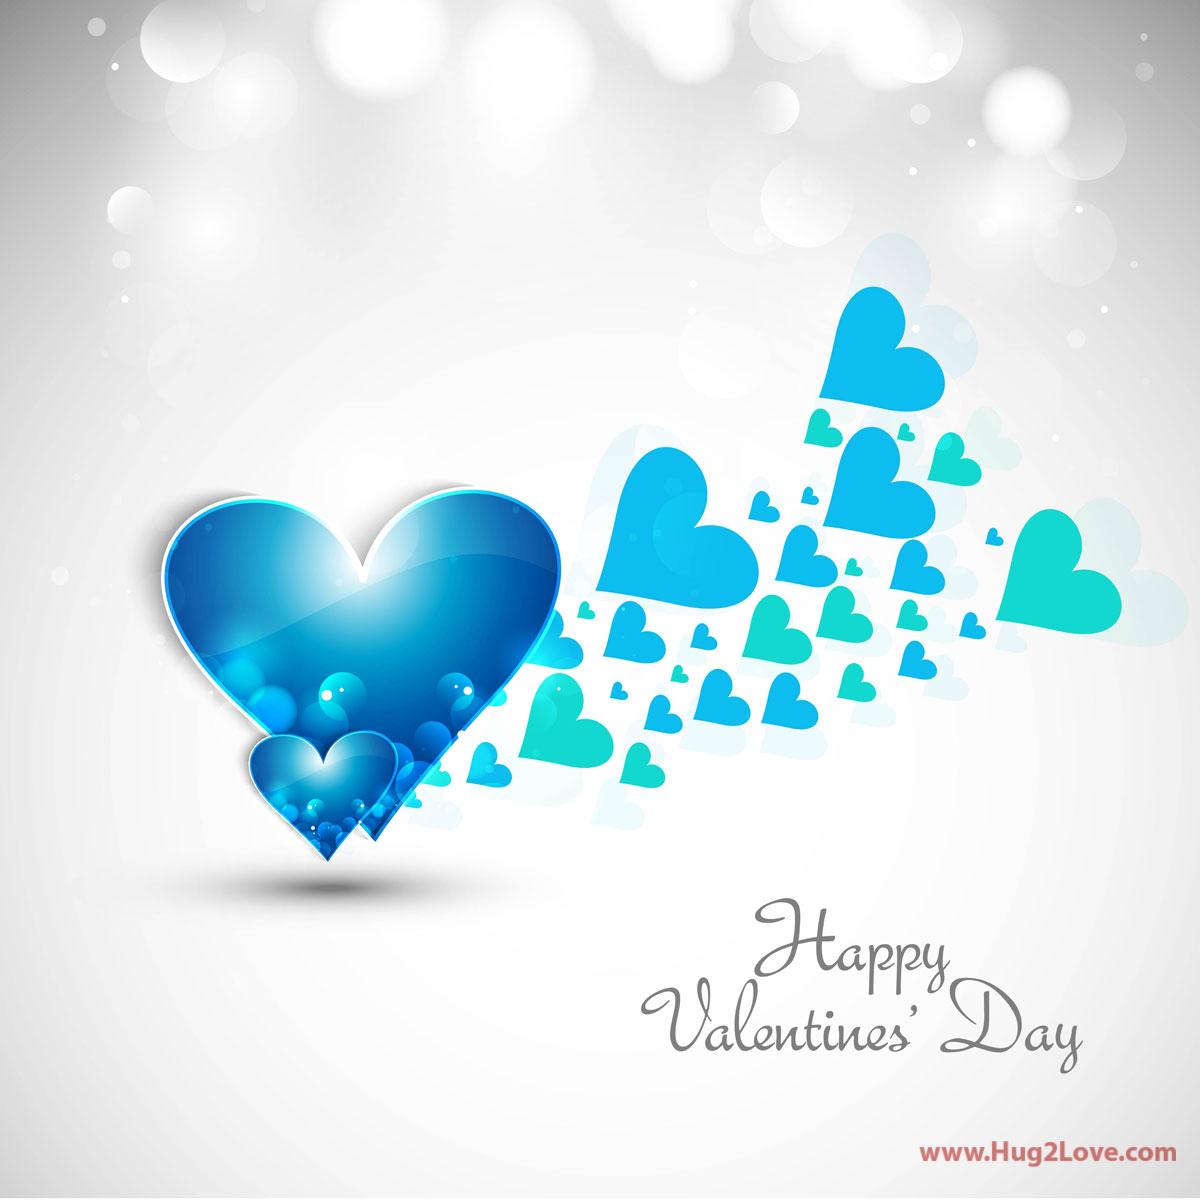 Free download 100 Happy Valentines Day Image Wallpaper 2020